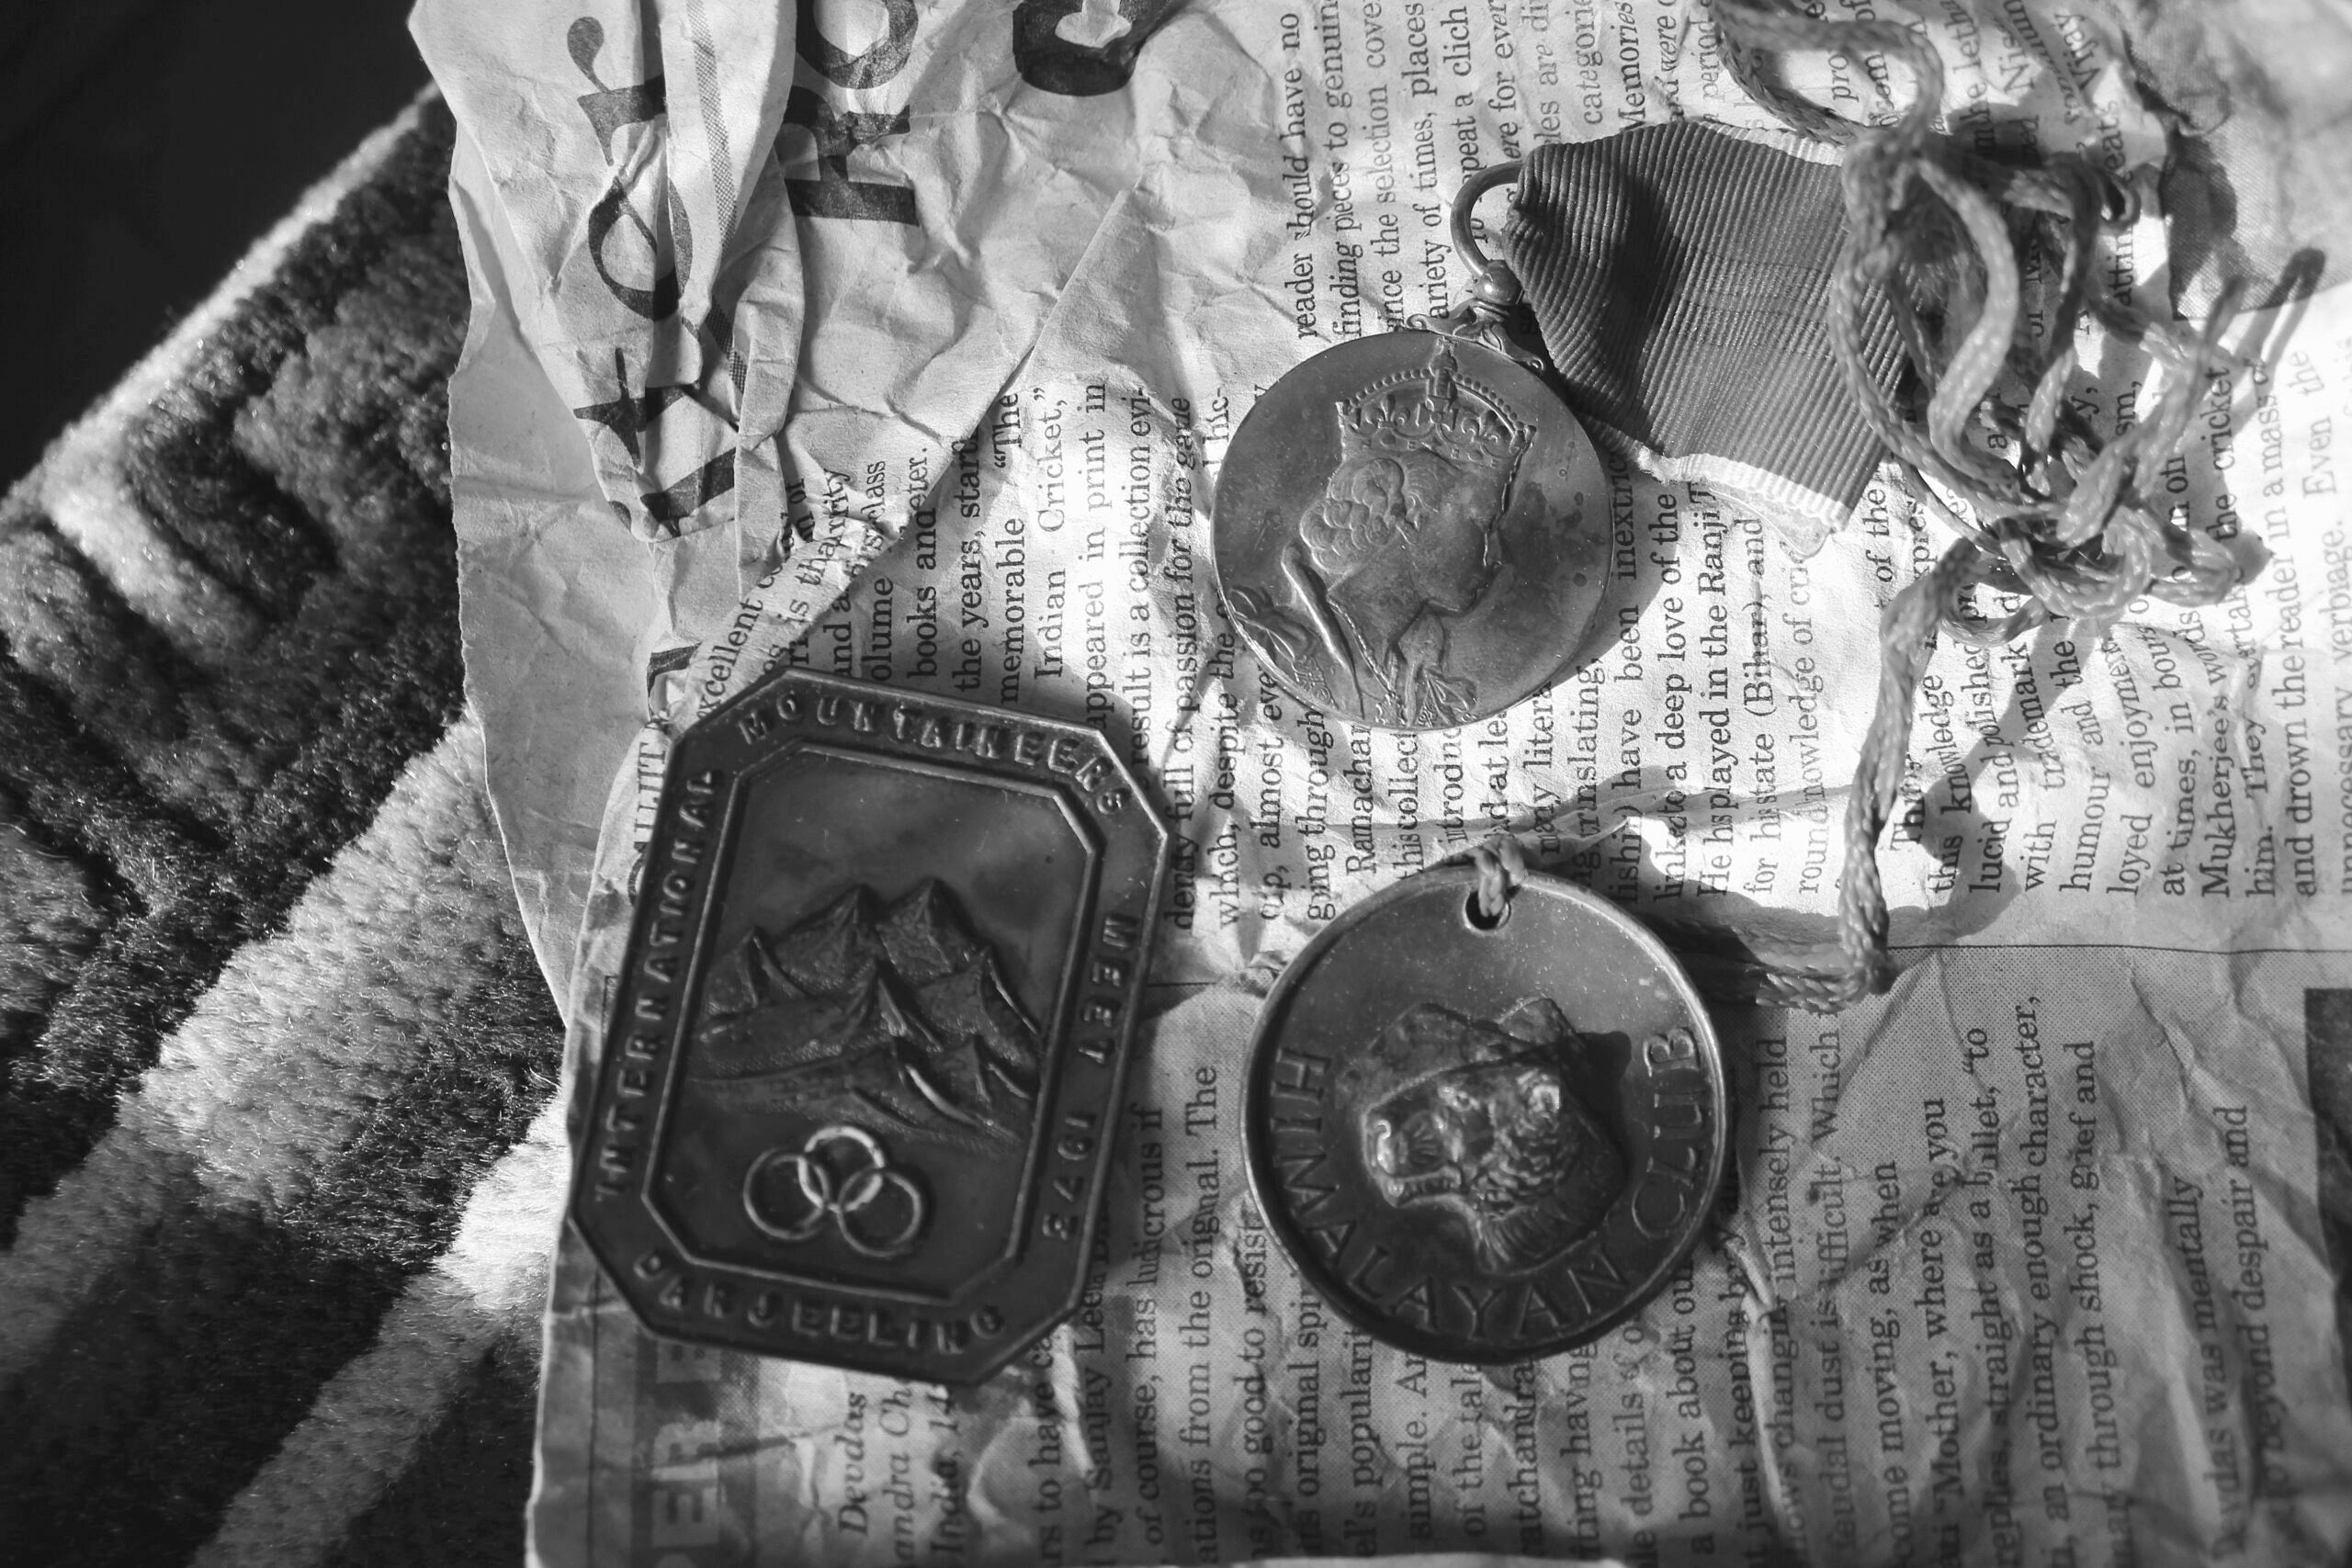 A collection of old Sherpa medals